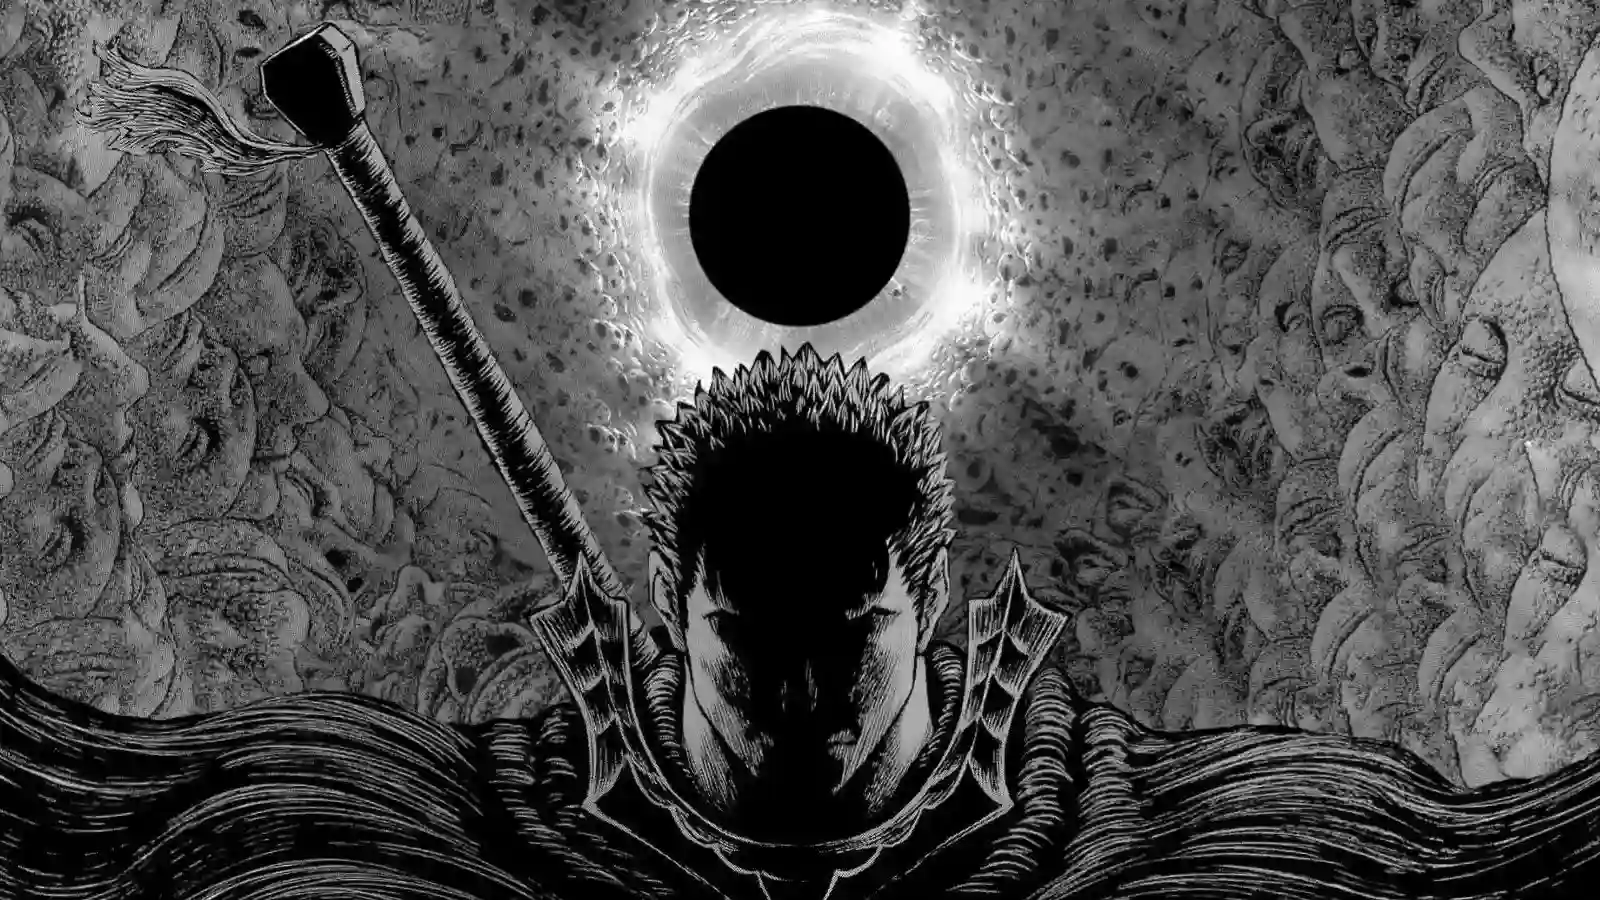 Guts and Griffith: The Dynamic Characters of Berserk Manga